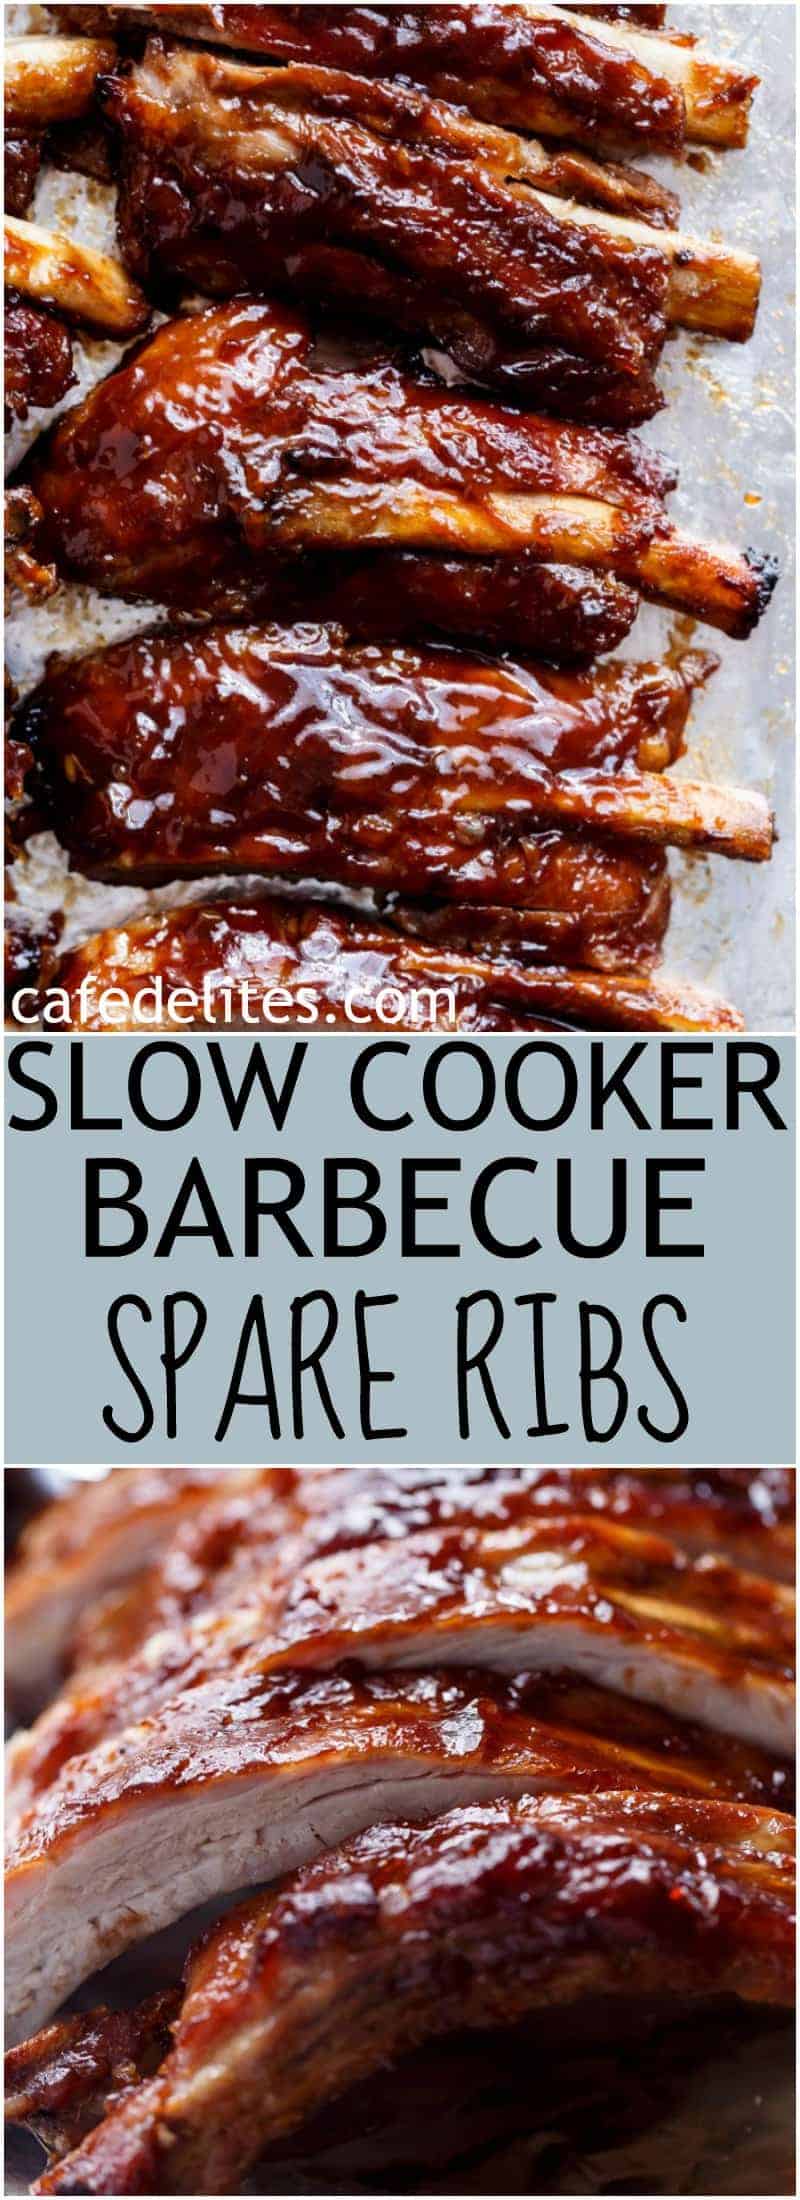 Easy Slow Cooker Barbecue Spare Ribs are melt-in-your-mouth incredible! Let your slow cooker do all the work and come home to sticky, fall apart ribs! | https://cafedelites.com